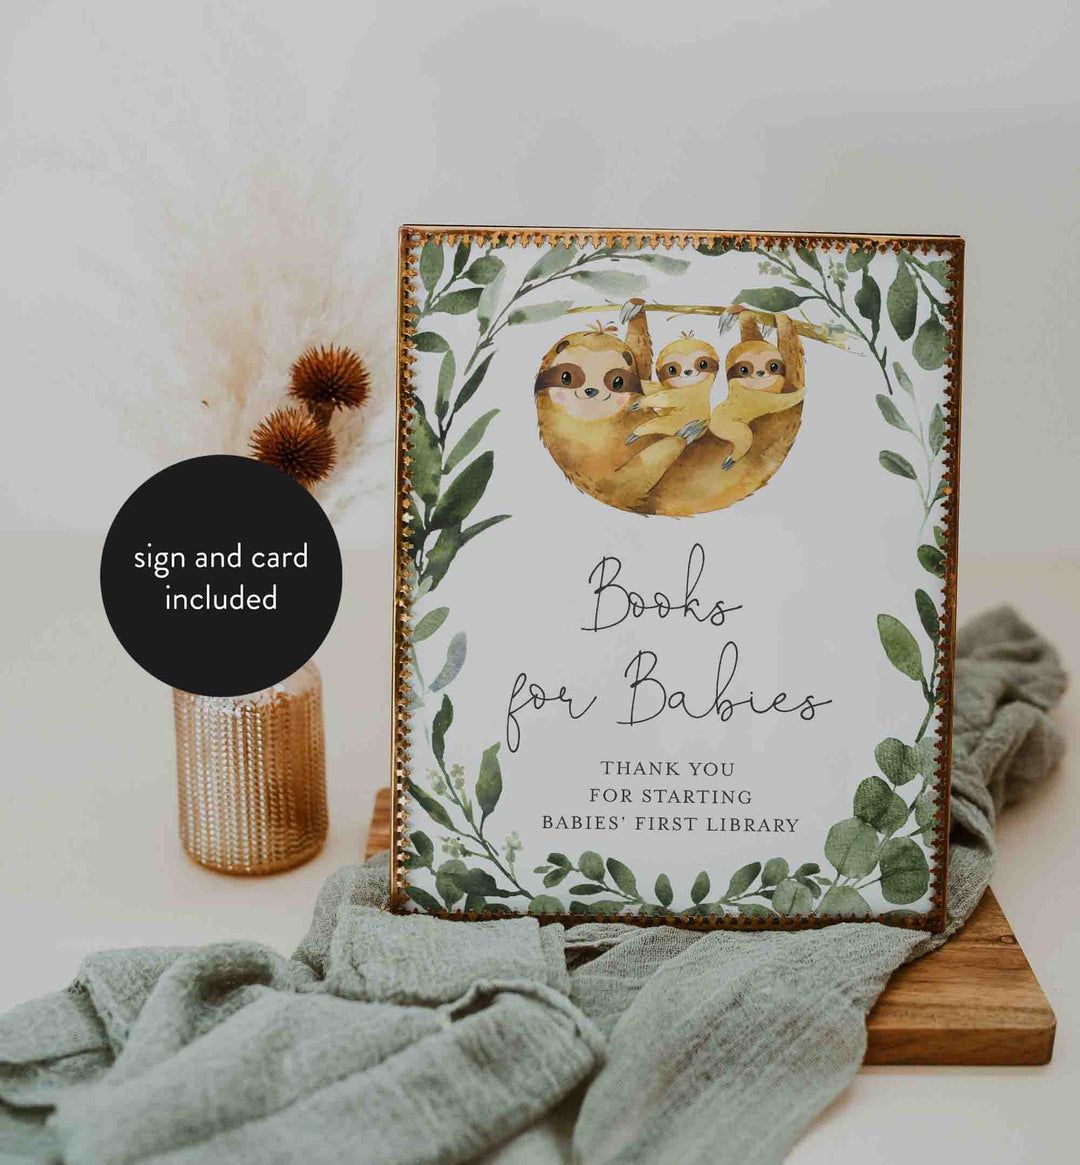 Twin Sloths Baby Shower Books For Baby Printable